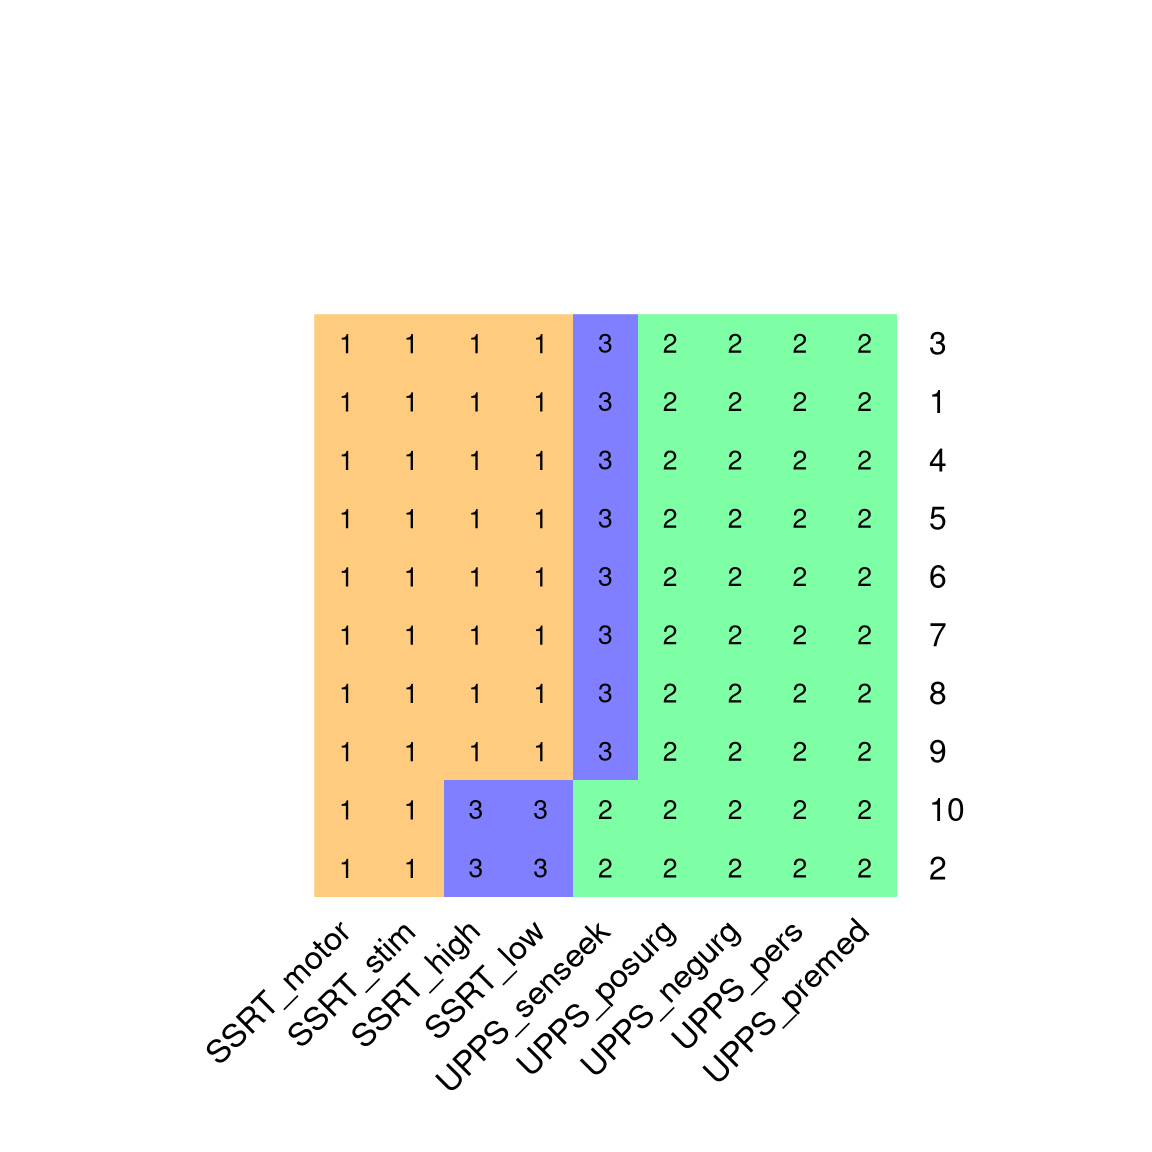 A visualization of the clustering results from 10 runs of the K-means clustering algorithm with K=3. Each row in the figure represents a different run of the clustering algorithm (with different random starting points), and variables sharing the same color are members of the same cluster.